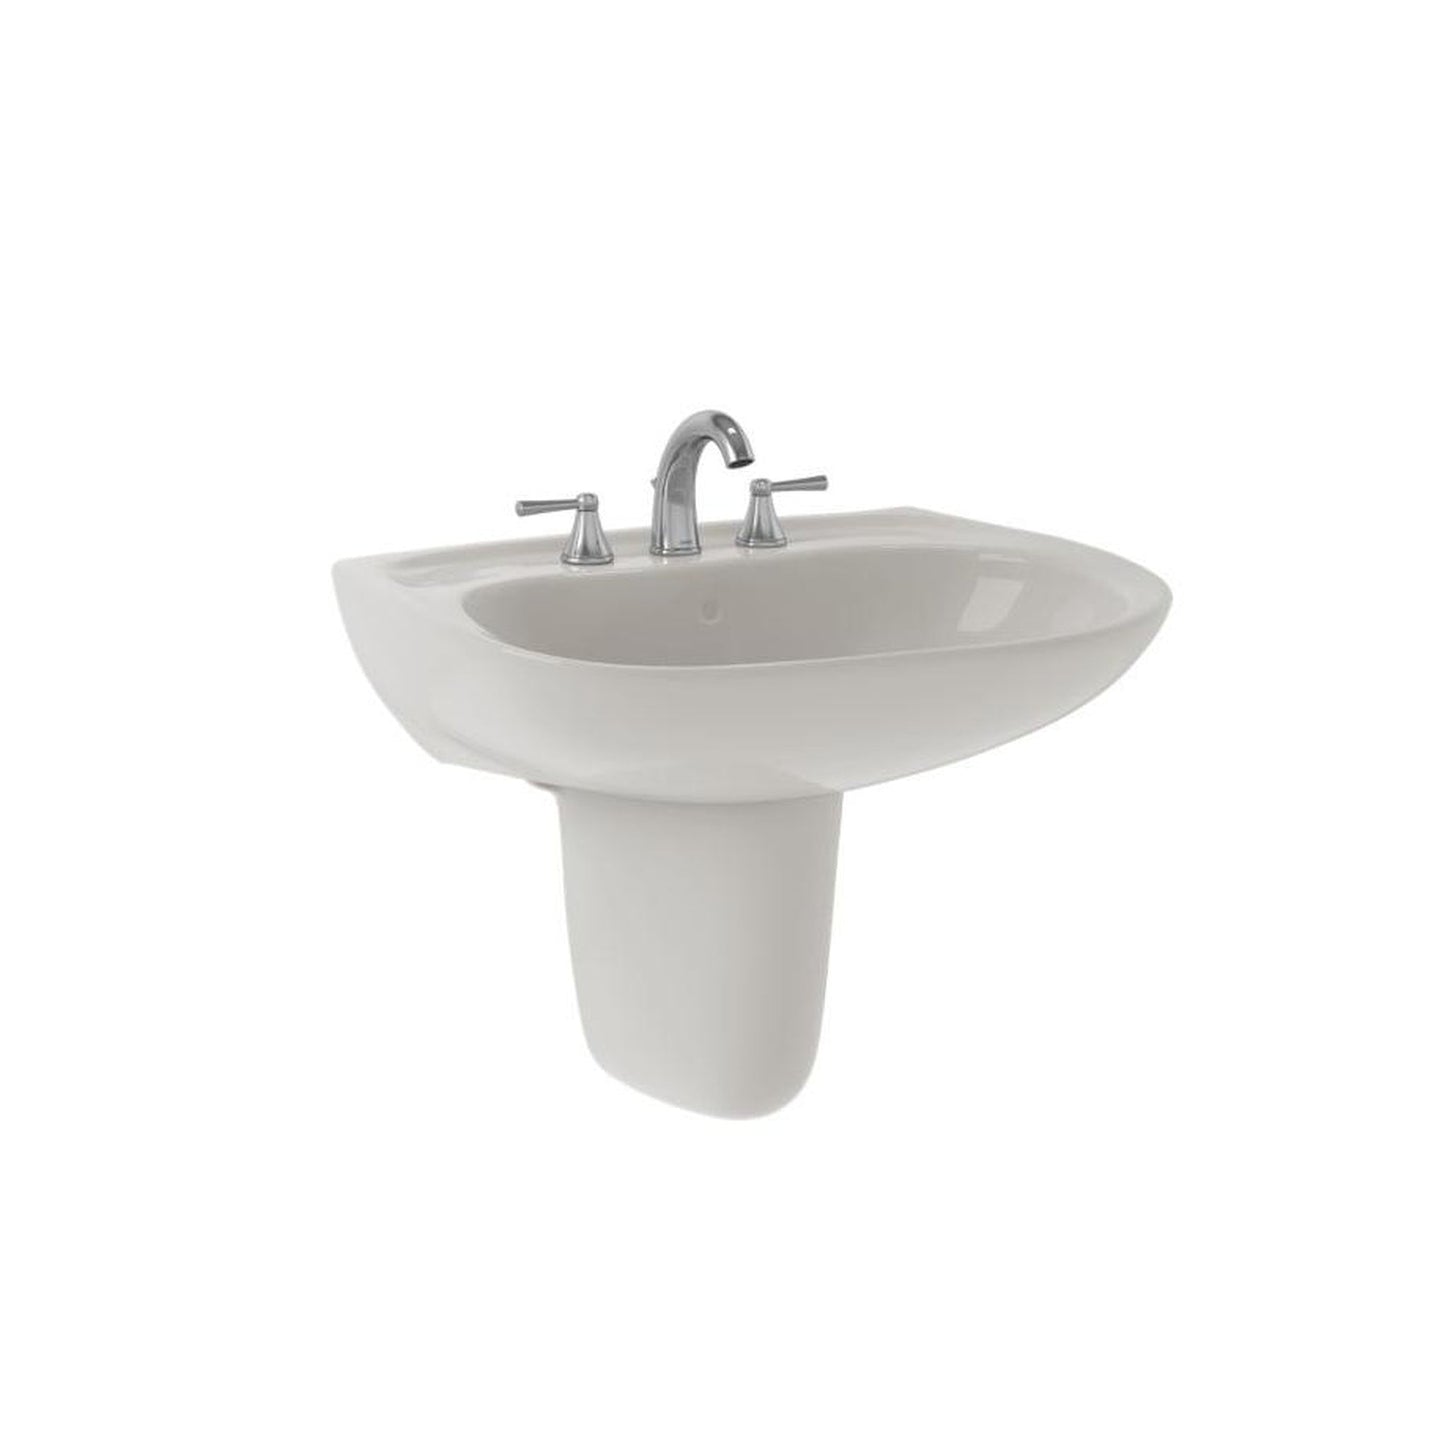 Toto Prominence 4” Ctr Lav & Shrd Colonial White